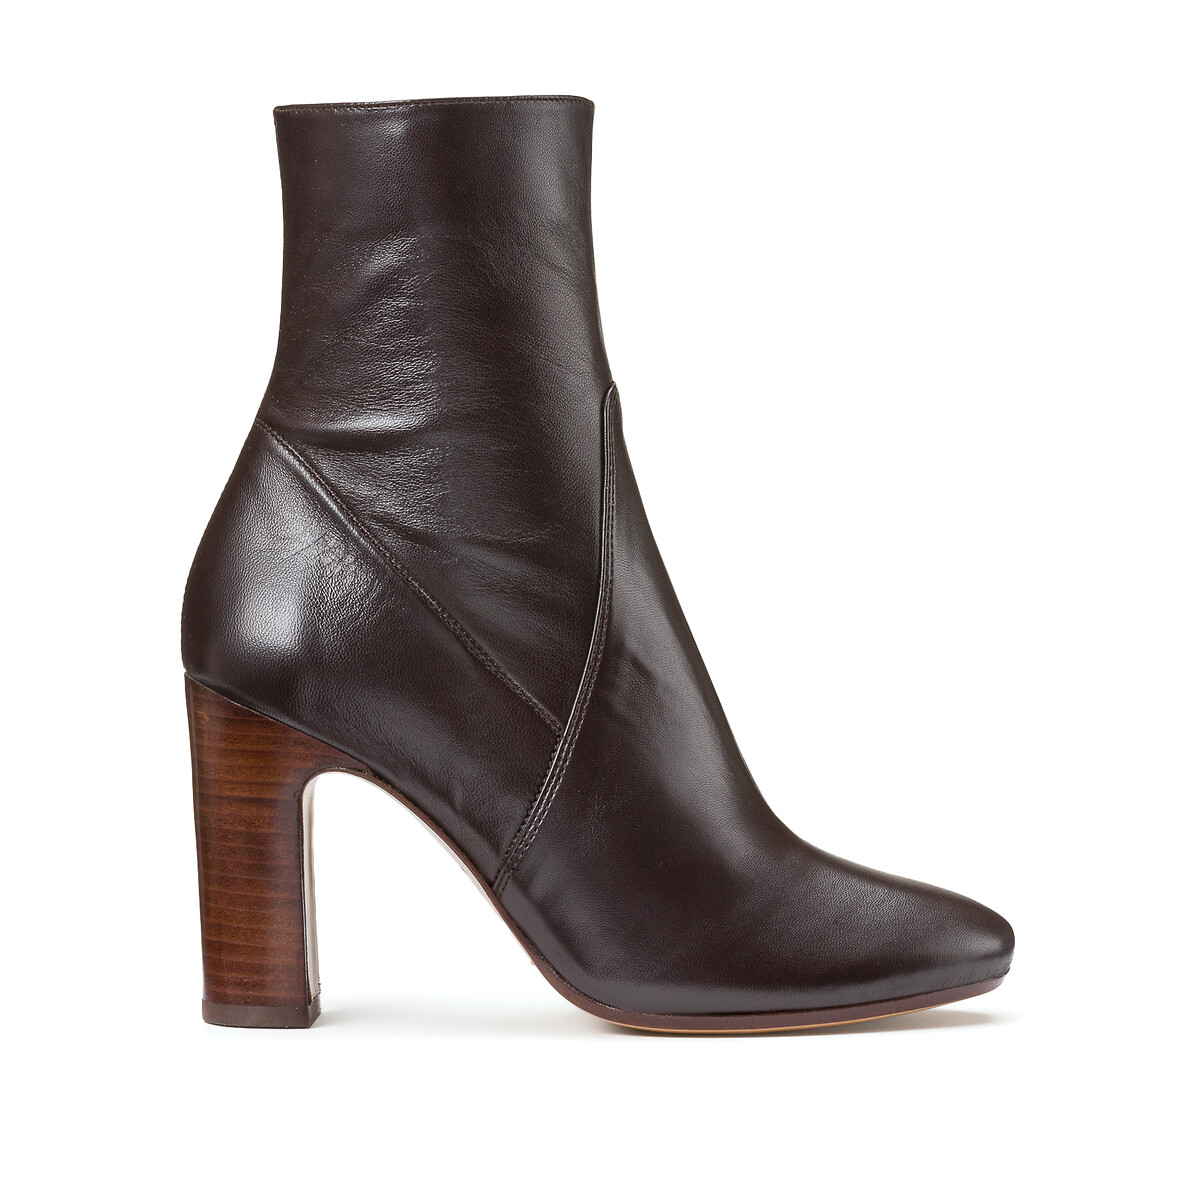 Ndeg92 Leather Ankle Boots with High Heel